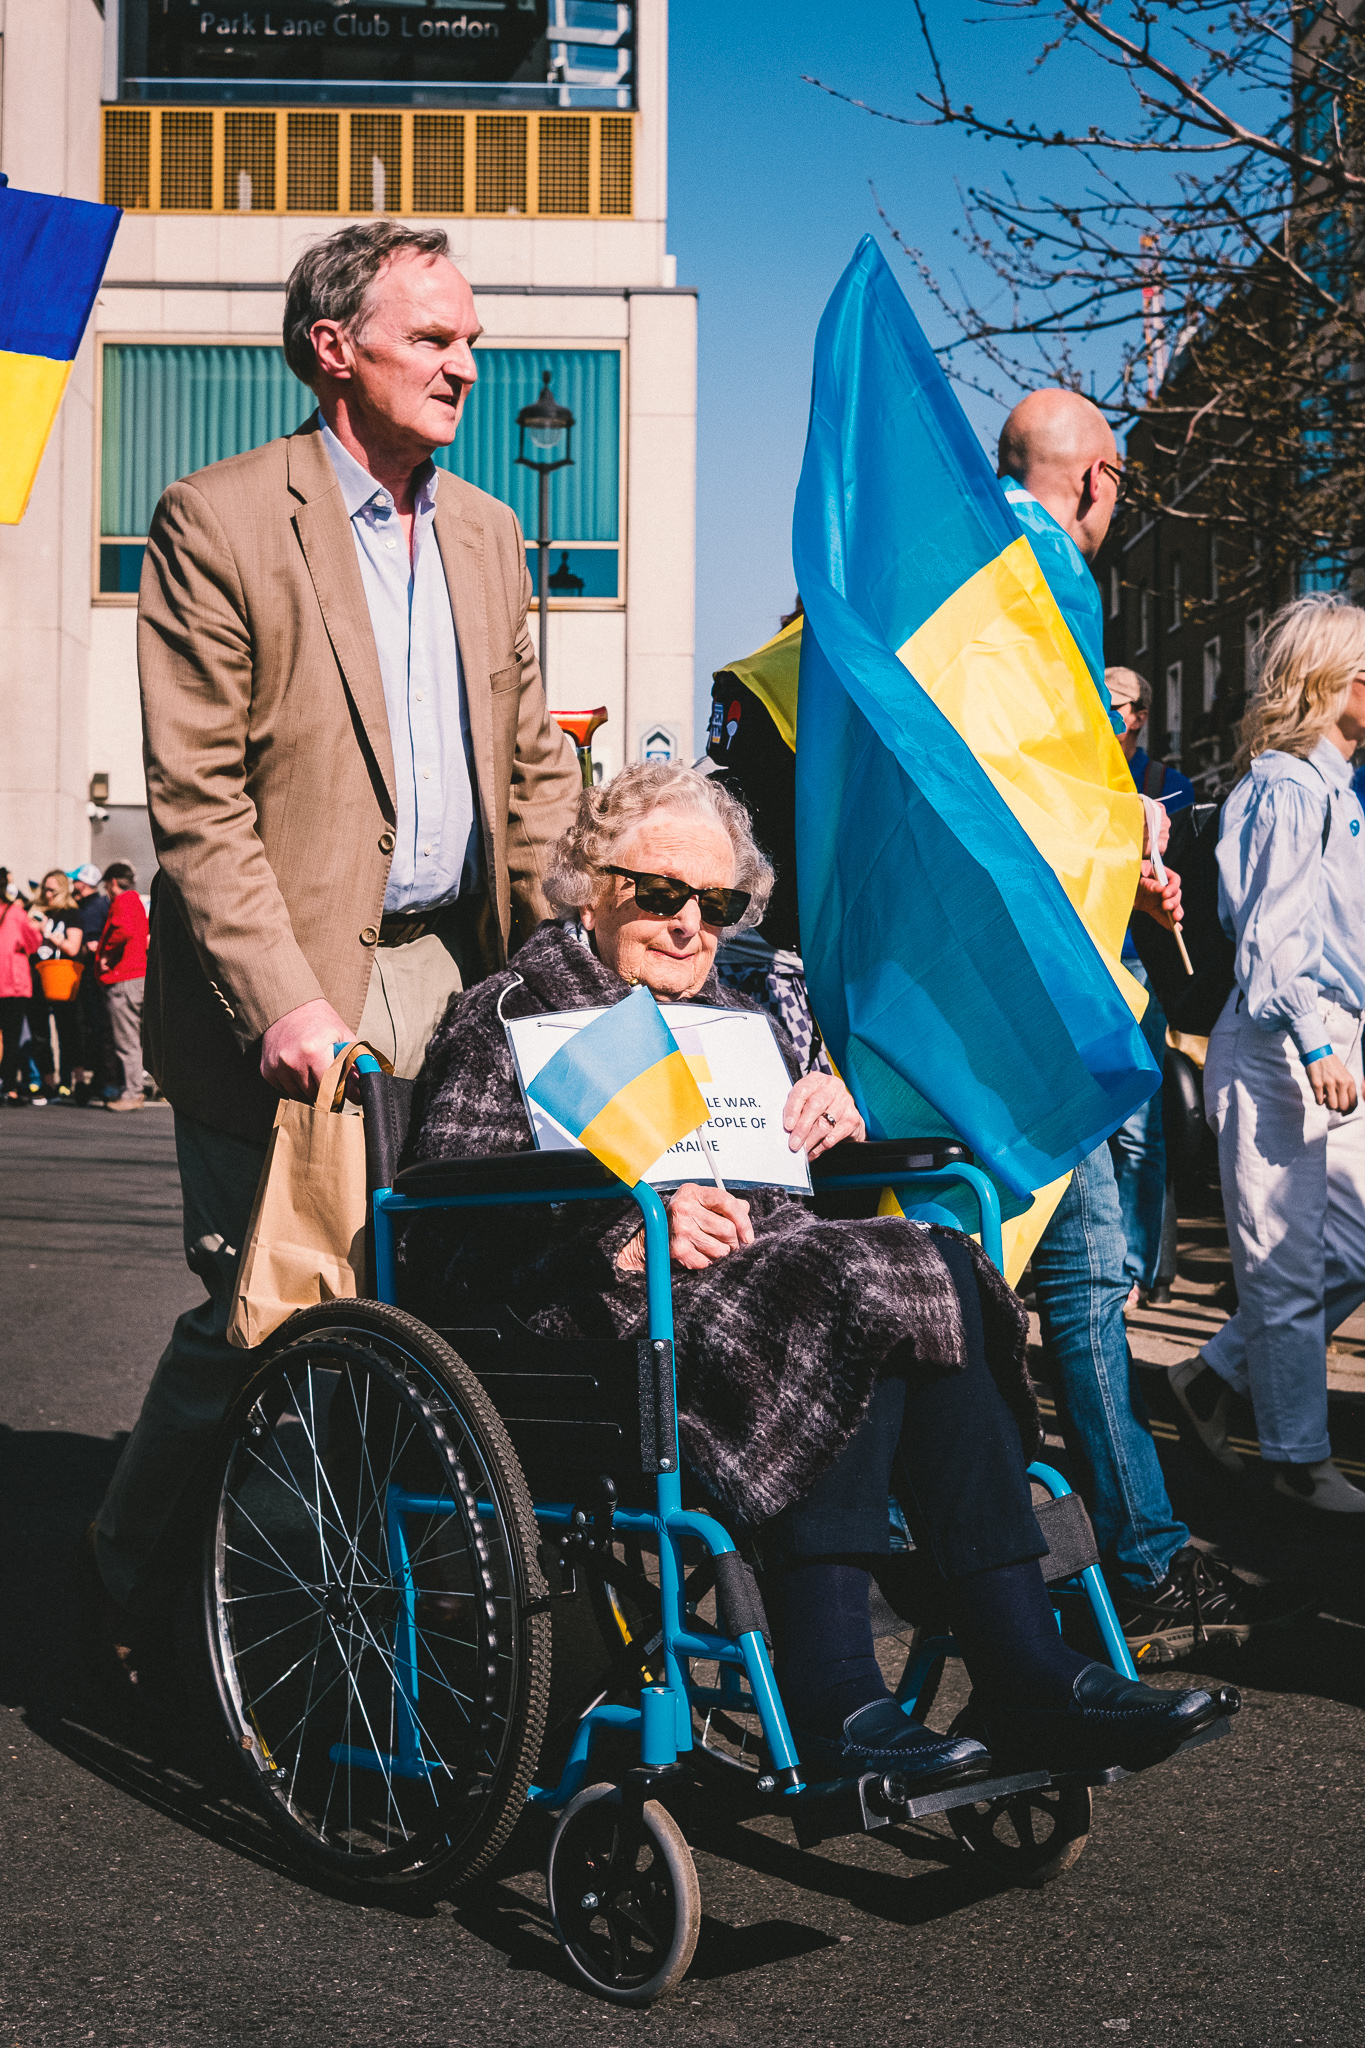 An elderly lady in a wheelchair arriving at the protest with a male companion